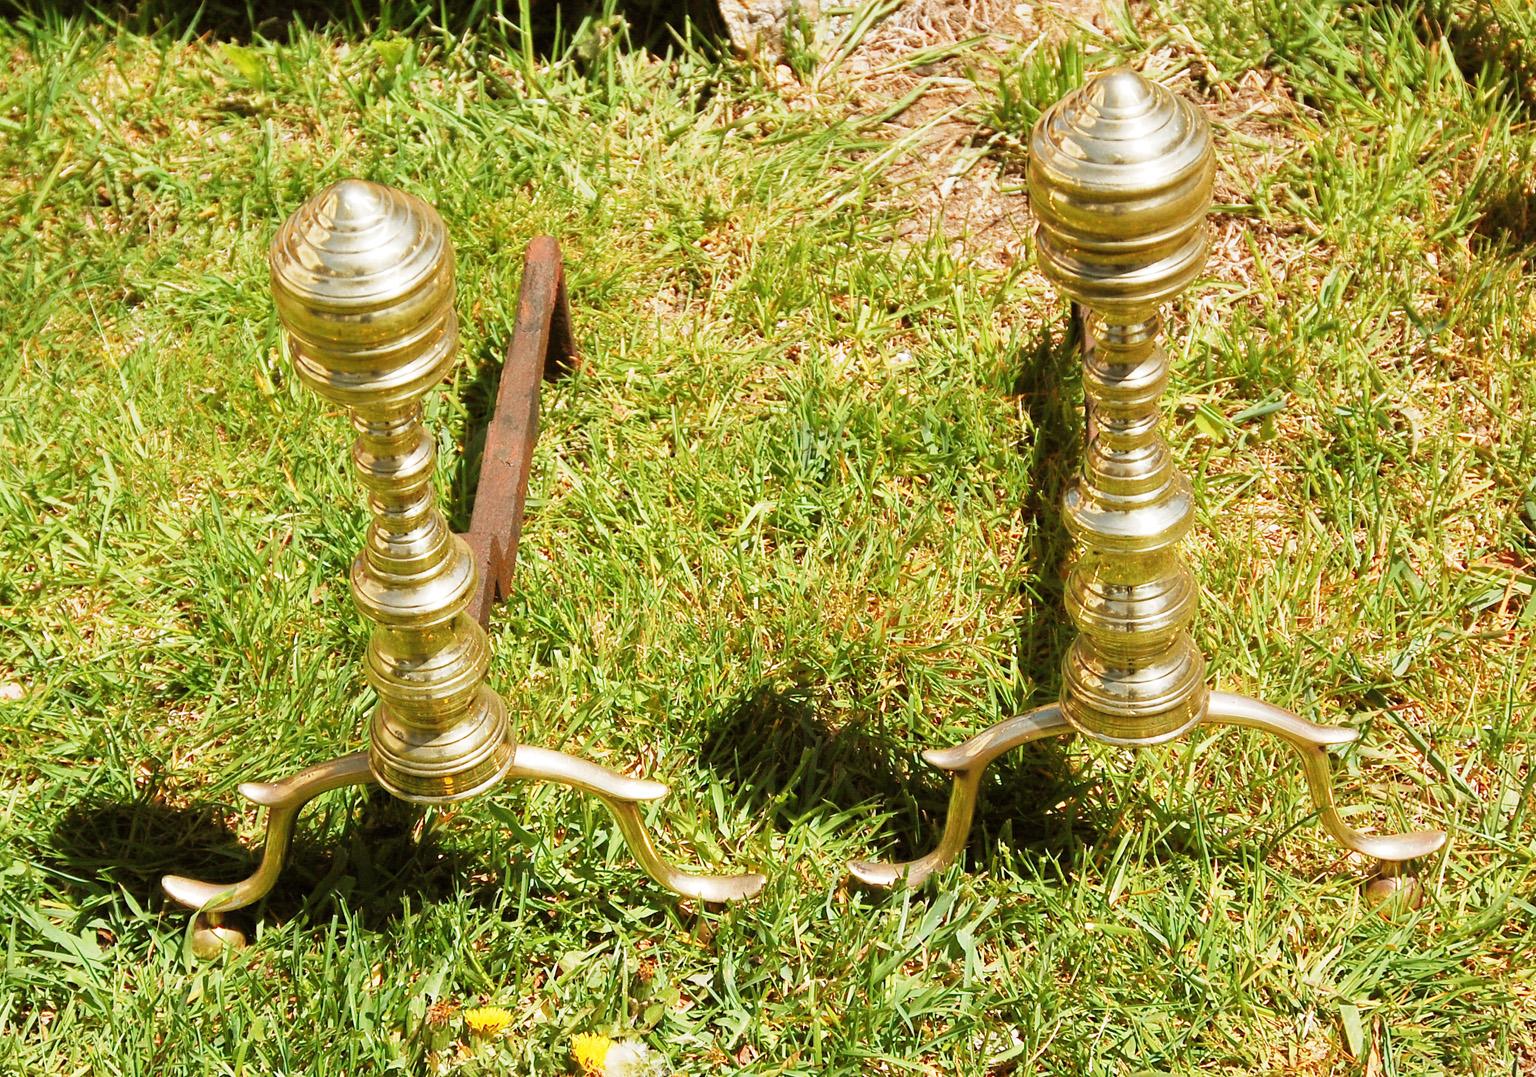 American Empire period brass andirons with cabriole legs, spurred knees, sitting on ball feet. The wrought iron log holders are stepped down so there was no need for brass log stops, the shape of the log holders kept the logs from impinging on the